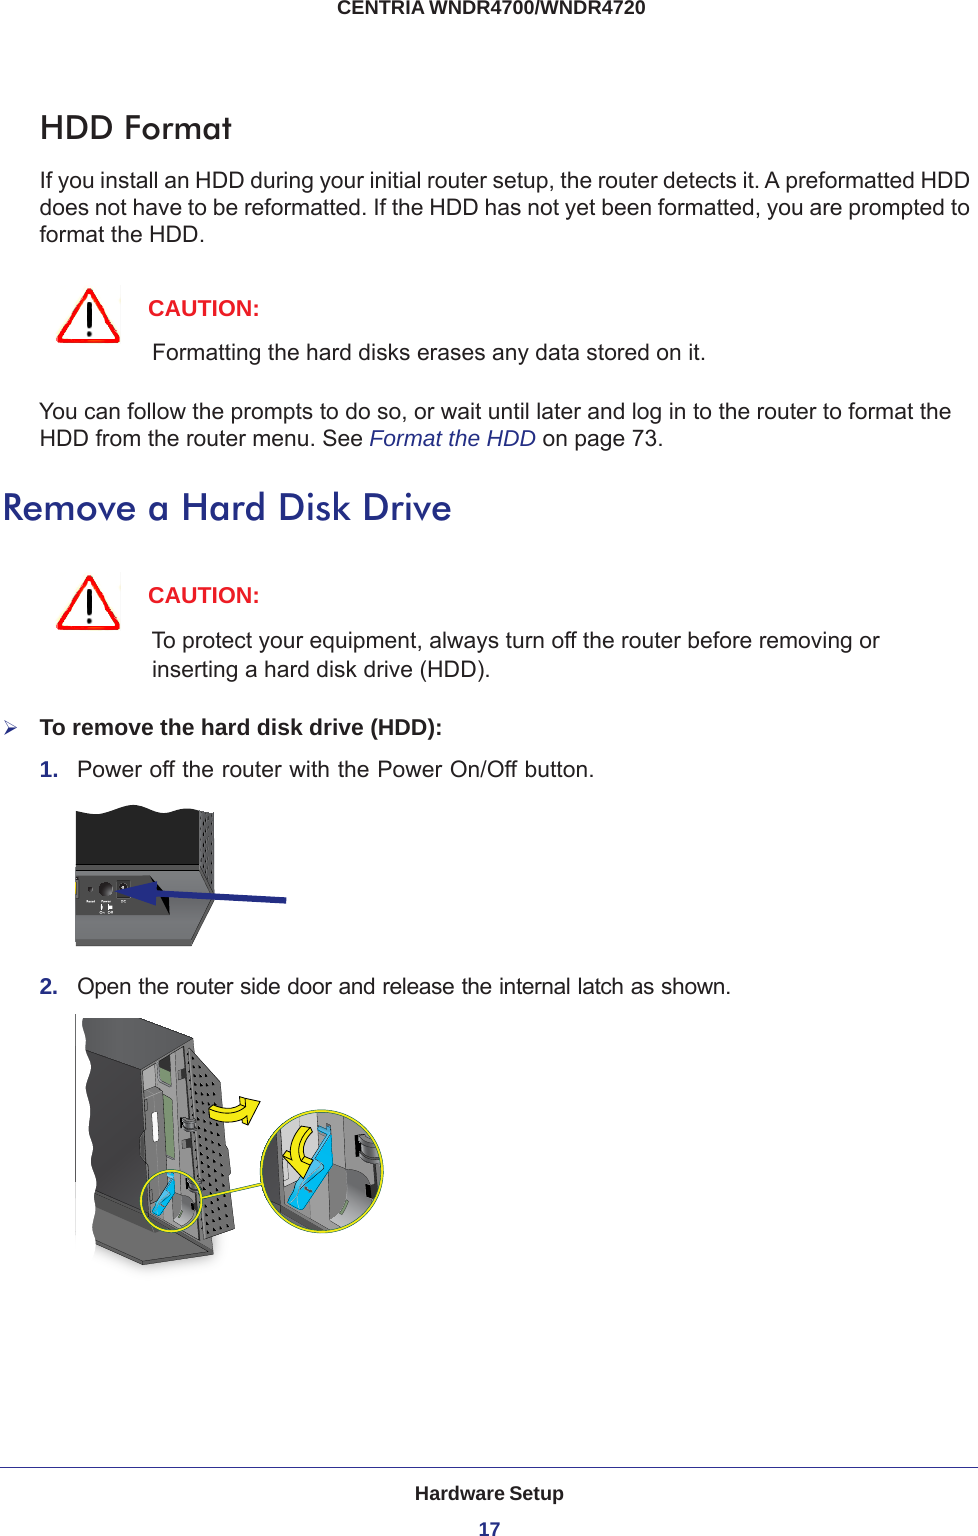 Hardware Setup17 CENTRIA WNDR4700/WNDR4720HDD FormatIf you install an HDD during your initial router setup, the router detects it. A preformatted HDD does not have to be reformatted. If the HDD has not yet been formatted, you are prompted to format the HDD. CAUTION:Formatting the hard disks erases any data stored on it.You can follow the prompts to do so, or wait until later and log in to the router to format the HDD from the router menu. See Format the HDD on page  73.Remove a Hard Disk DriveCAUTION:To protect your equipment, always turn off the router before removing or inserting a hard disk drive (HDD).To remove the hard disk drive (HDD):1.  Power off the router with the Power On/Off button.2.  Open the router side door and release the internal latch as shown.